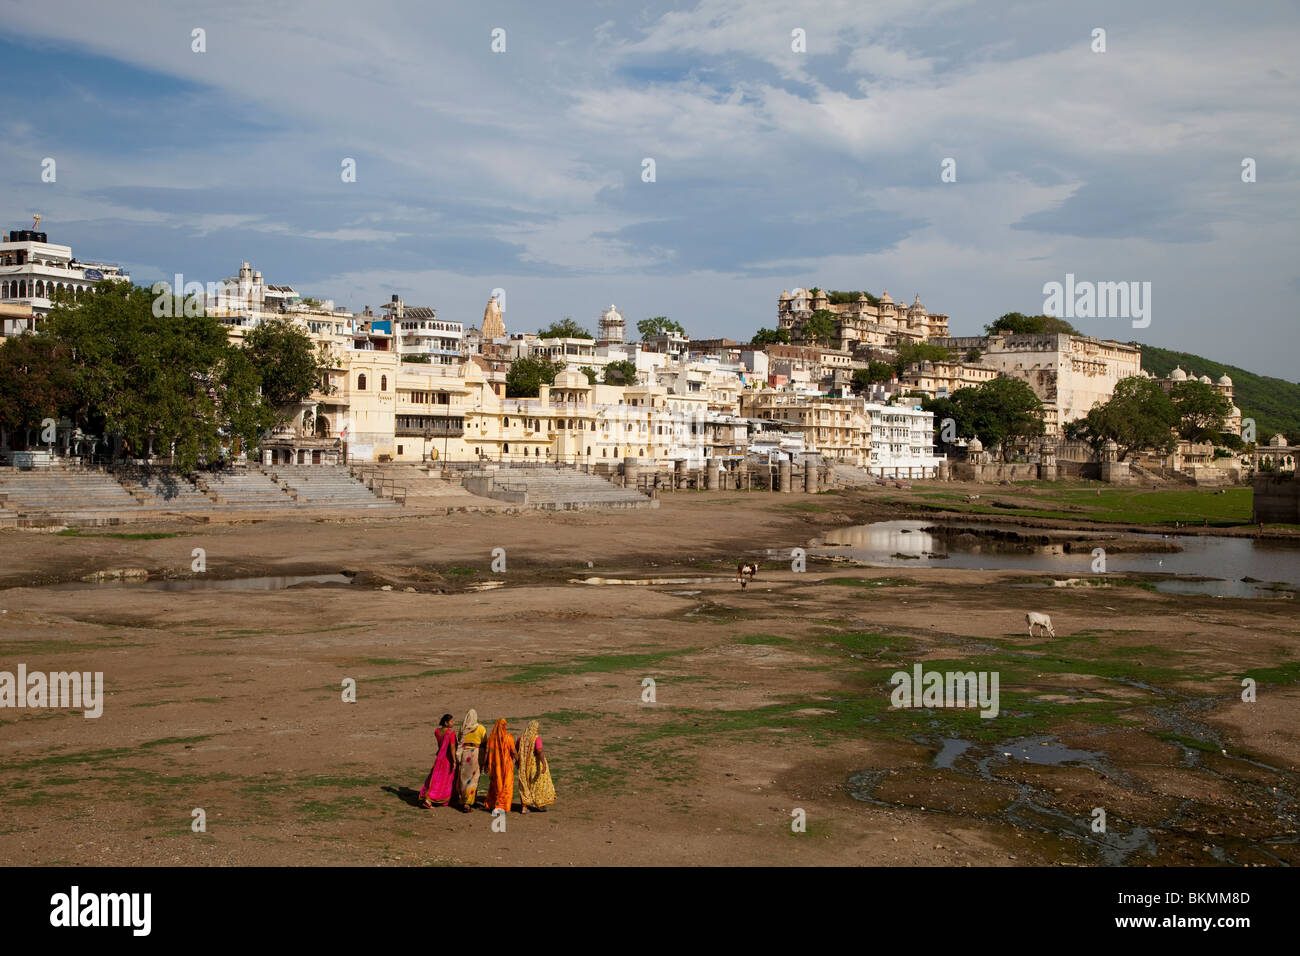 Women in saris walking across dried up lakebed, Udaipur, Rajasthan, India Stock Photo